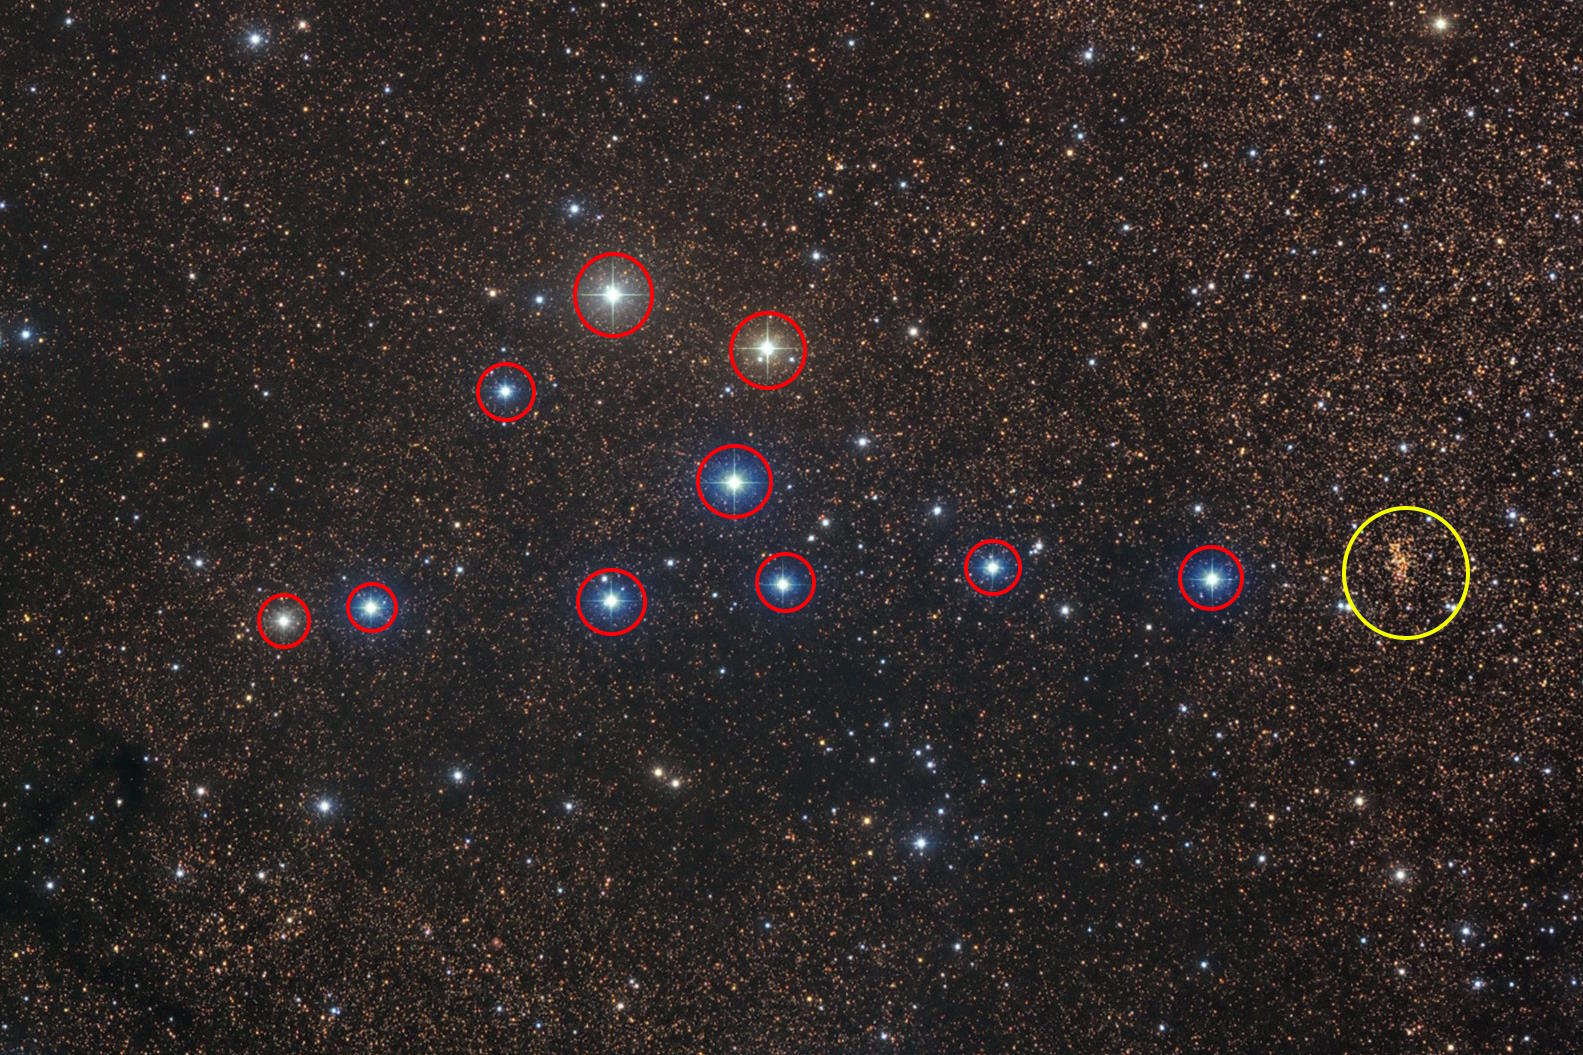 A cluster of stars with a red circle, not real.